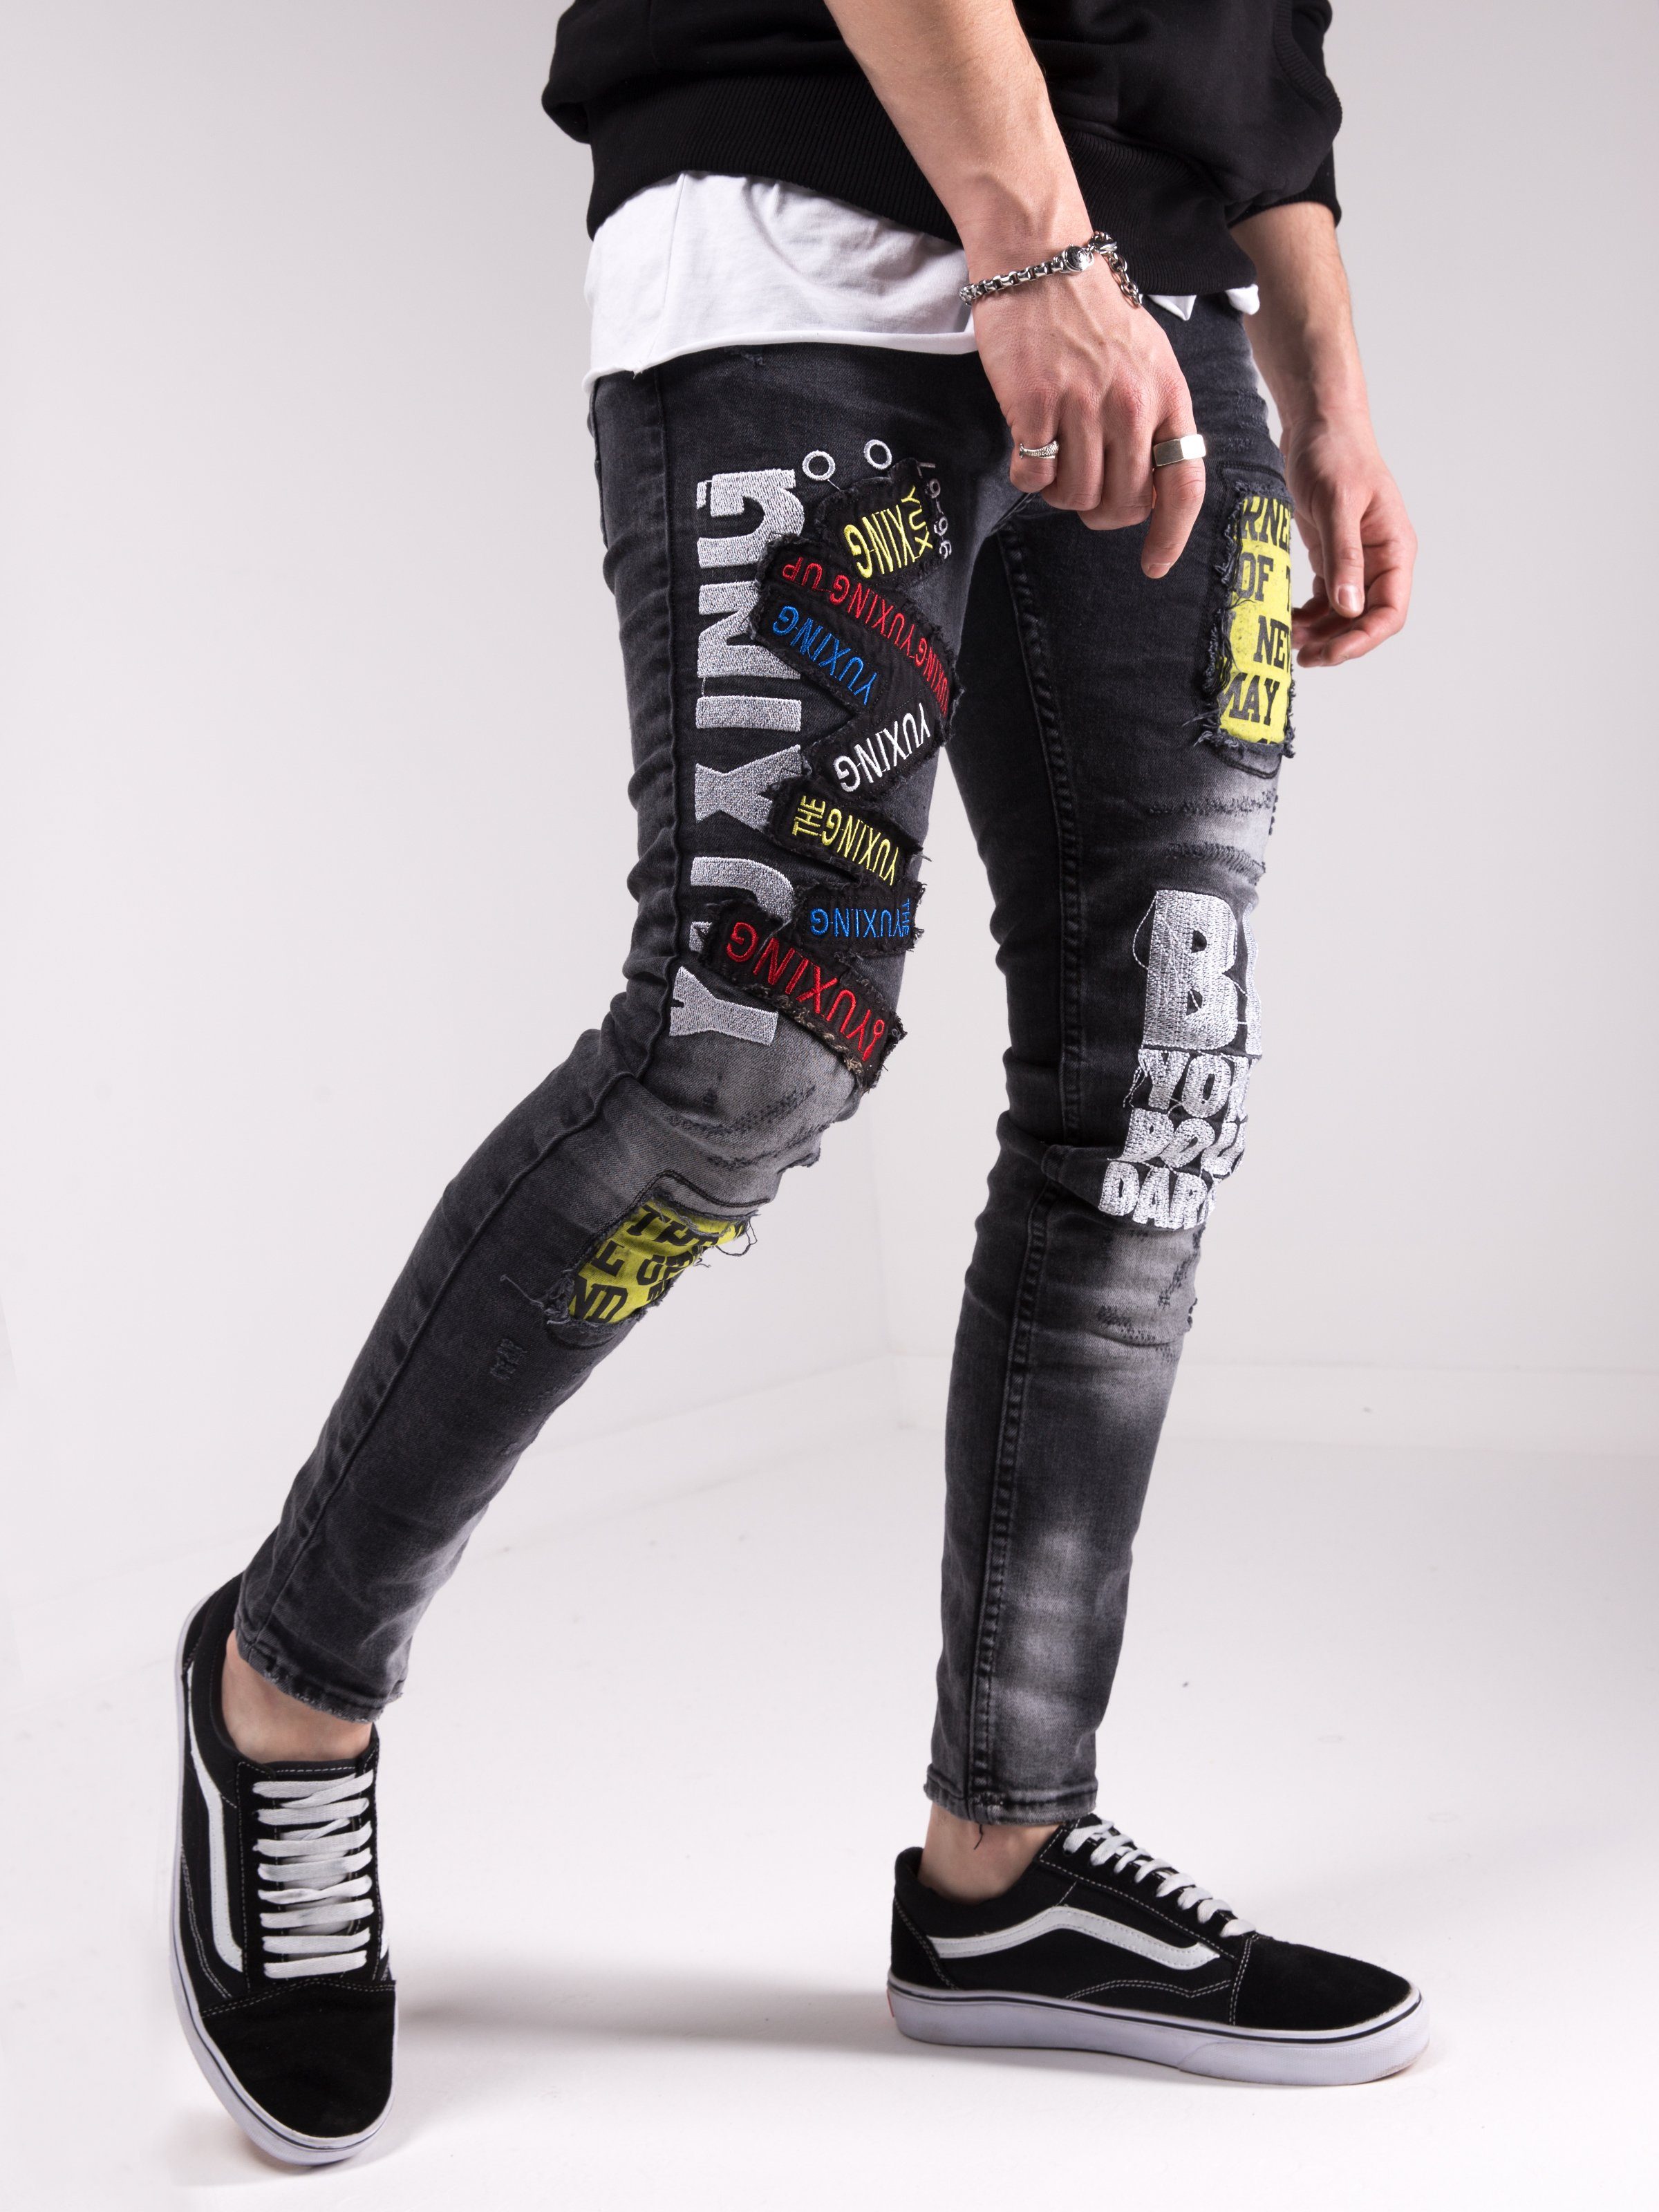 A man wearing a pair of SAVAGE SECRET jeans with graffiti on them.